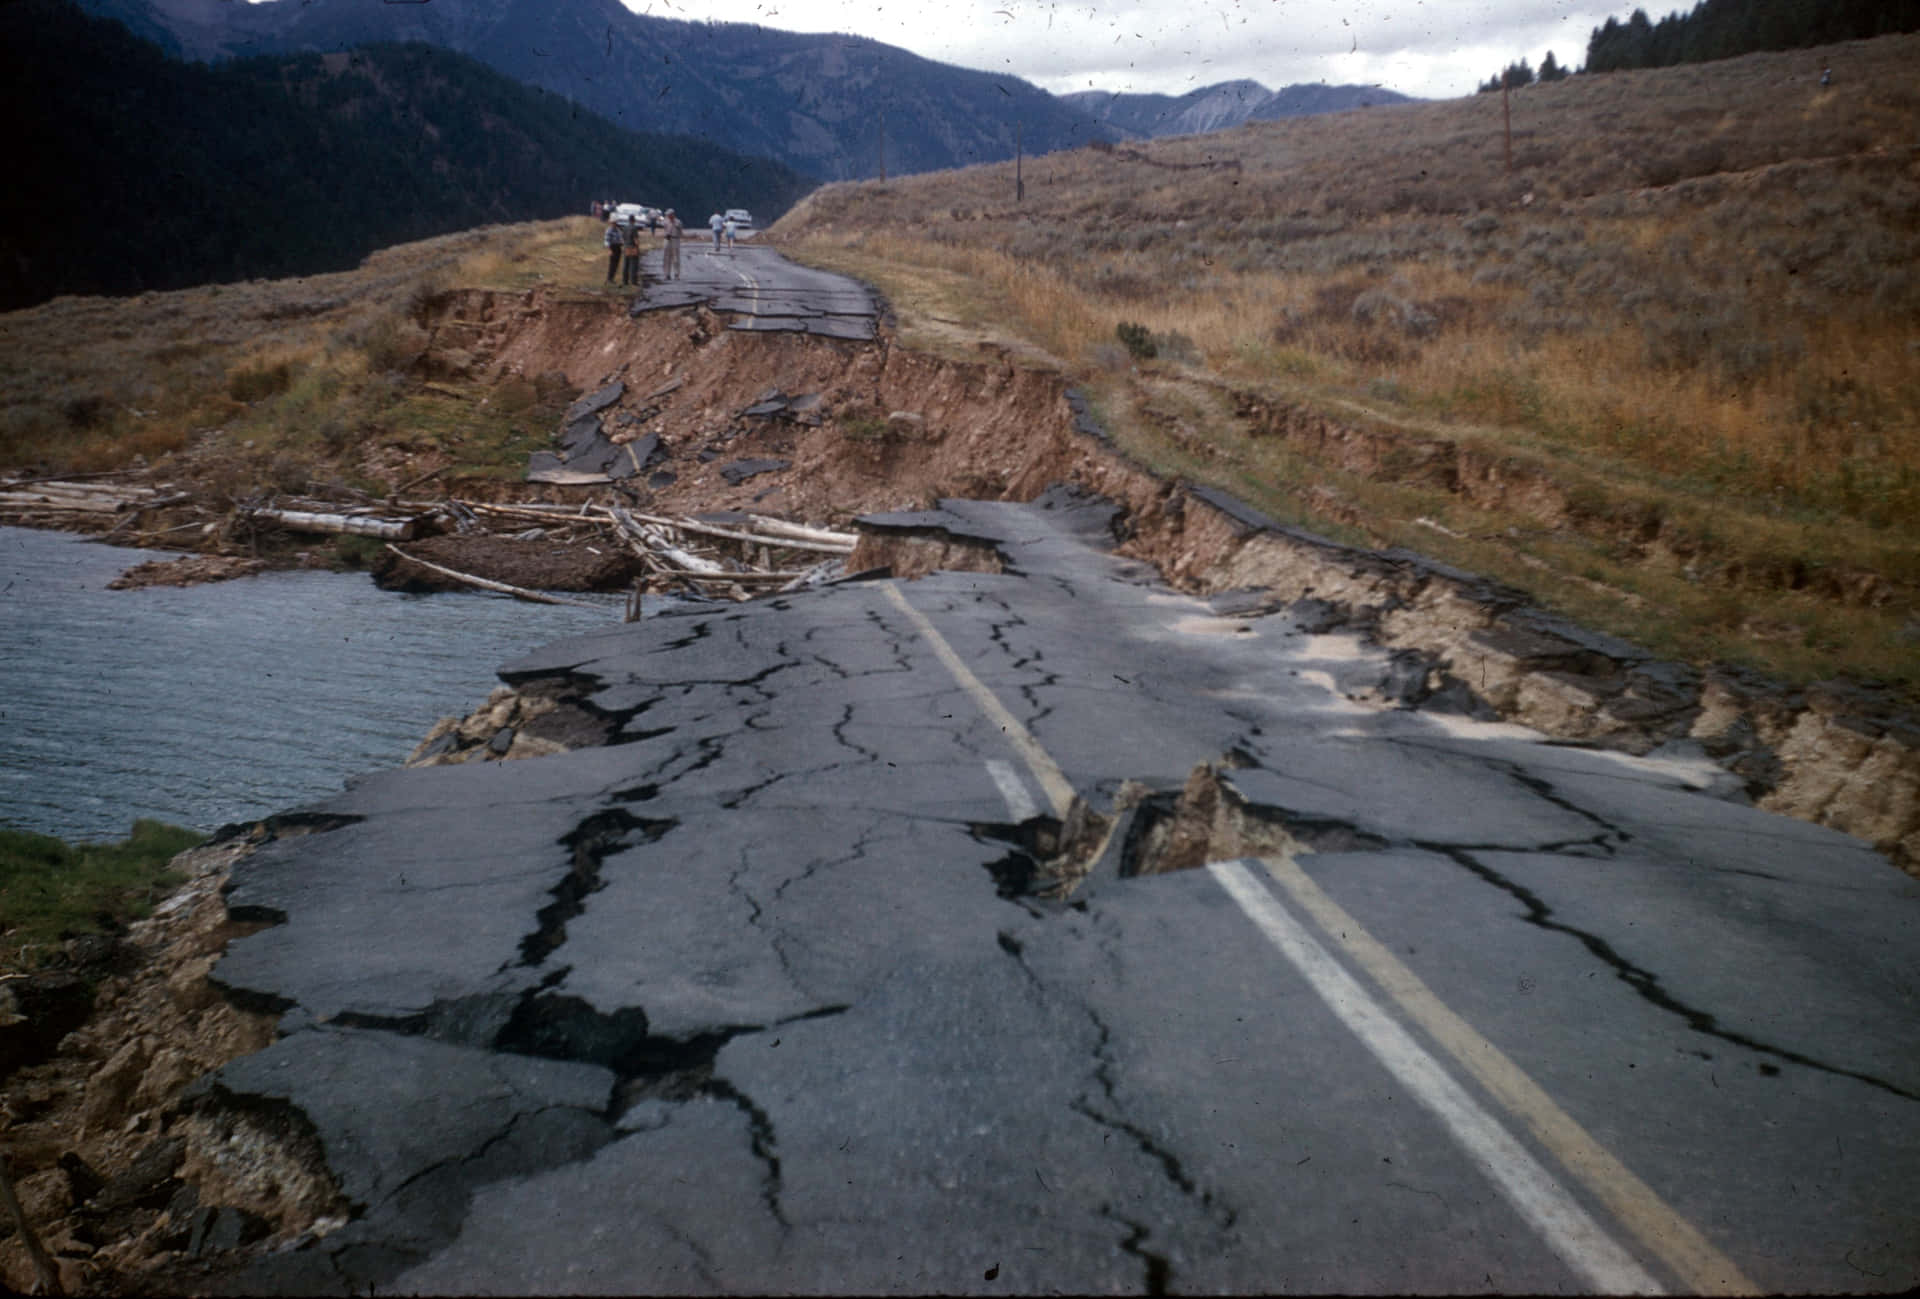 Damage caused by an earthquake